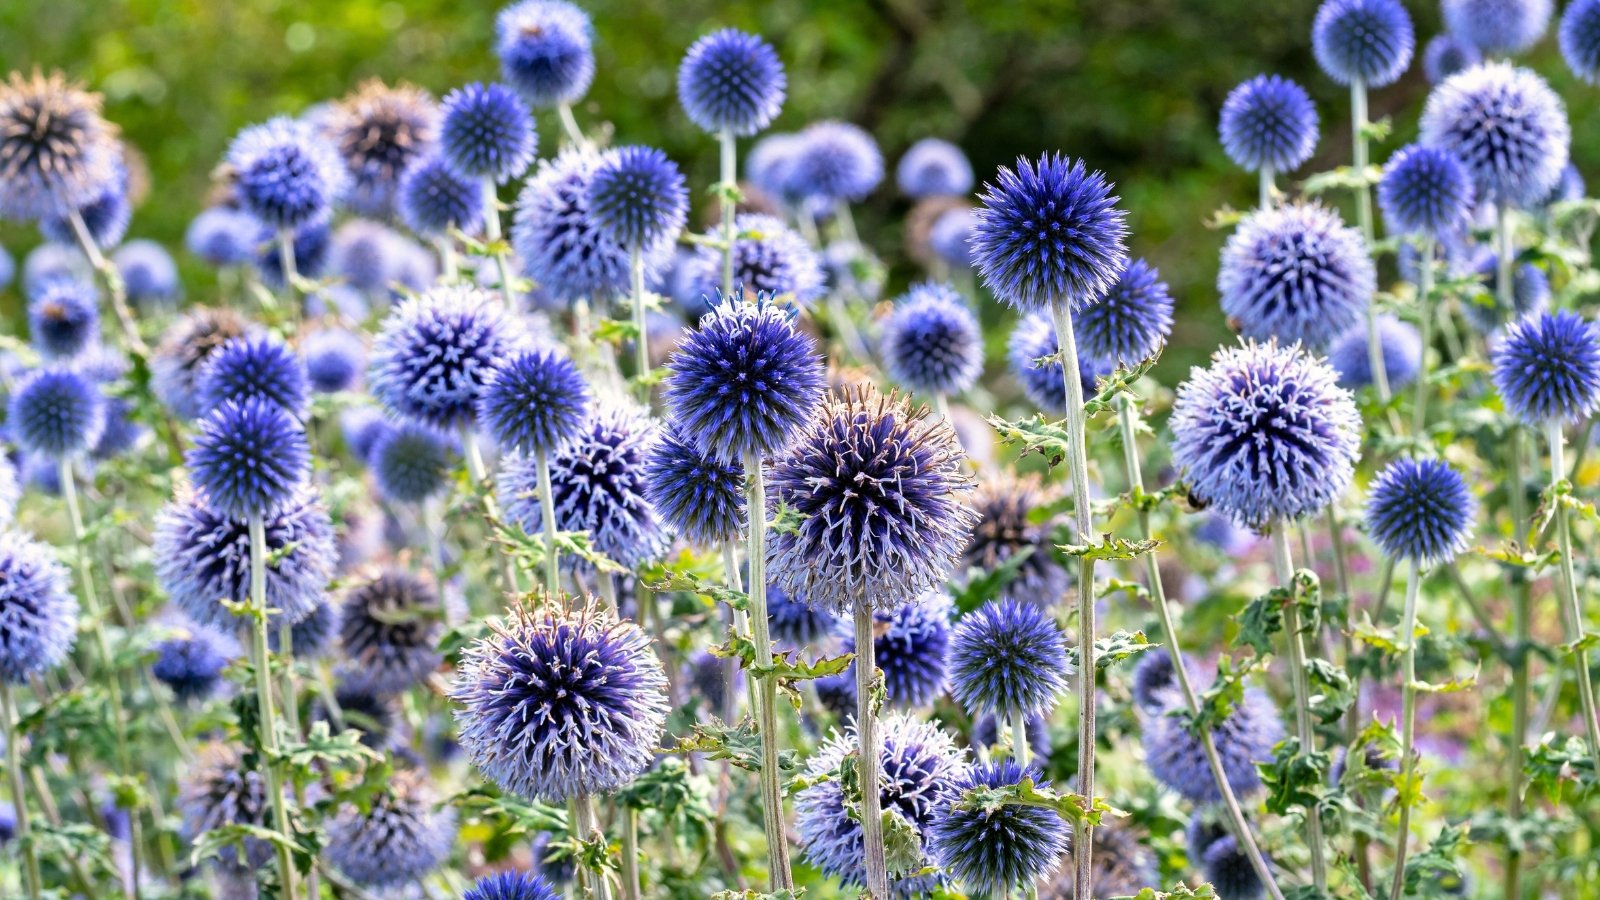 Echinops exhibits sturdy stems and deeply lobed, silver-gray foliage, crowned with spherical, steel-blue flower heads.